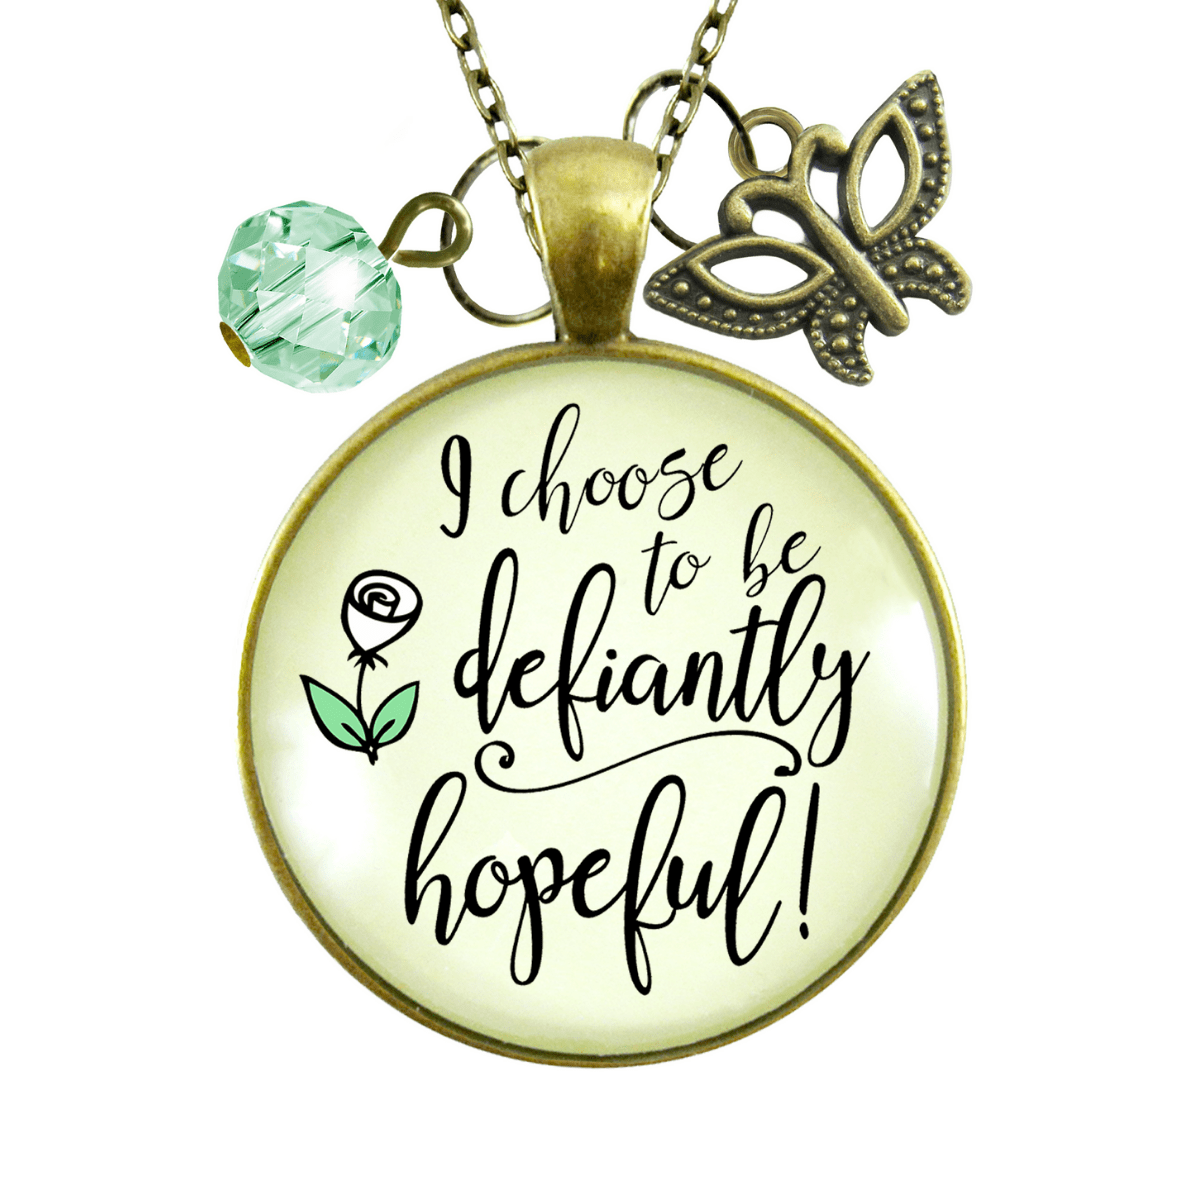 Gutsy Goodness Inspirational Necklace I Choose Defiantly Hopeful Survivor Quote - Gutsy Goodness Handmade Jewelry;Inspirational Necklace I Choose Defiantly Hopeful Survivor Quote - Gutsy Goodness Handmade Jewelry Gifts